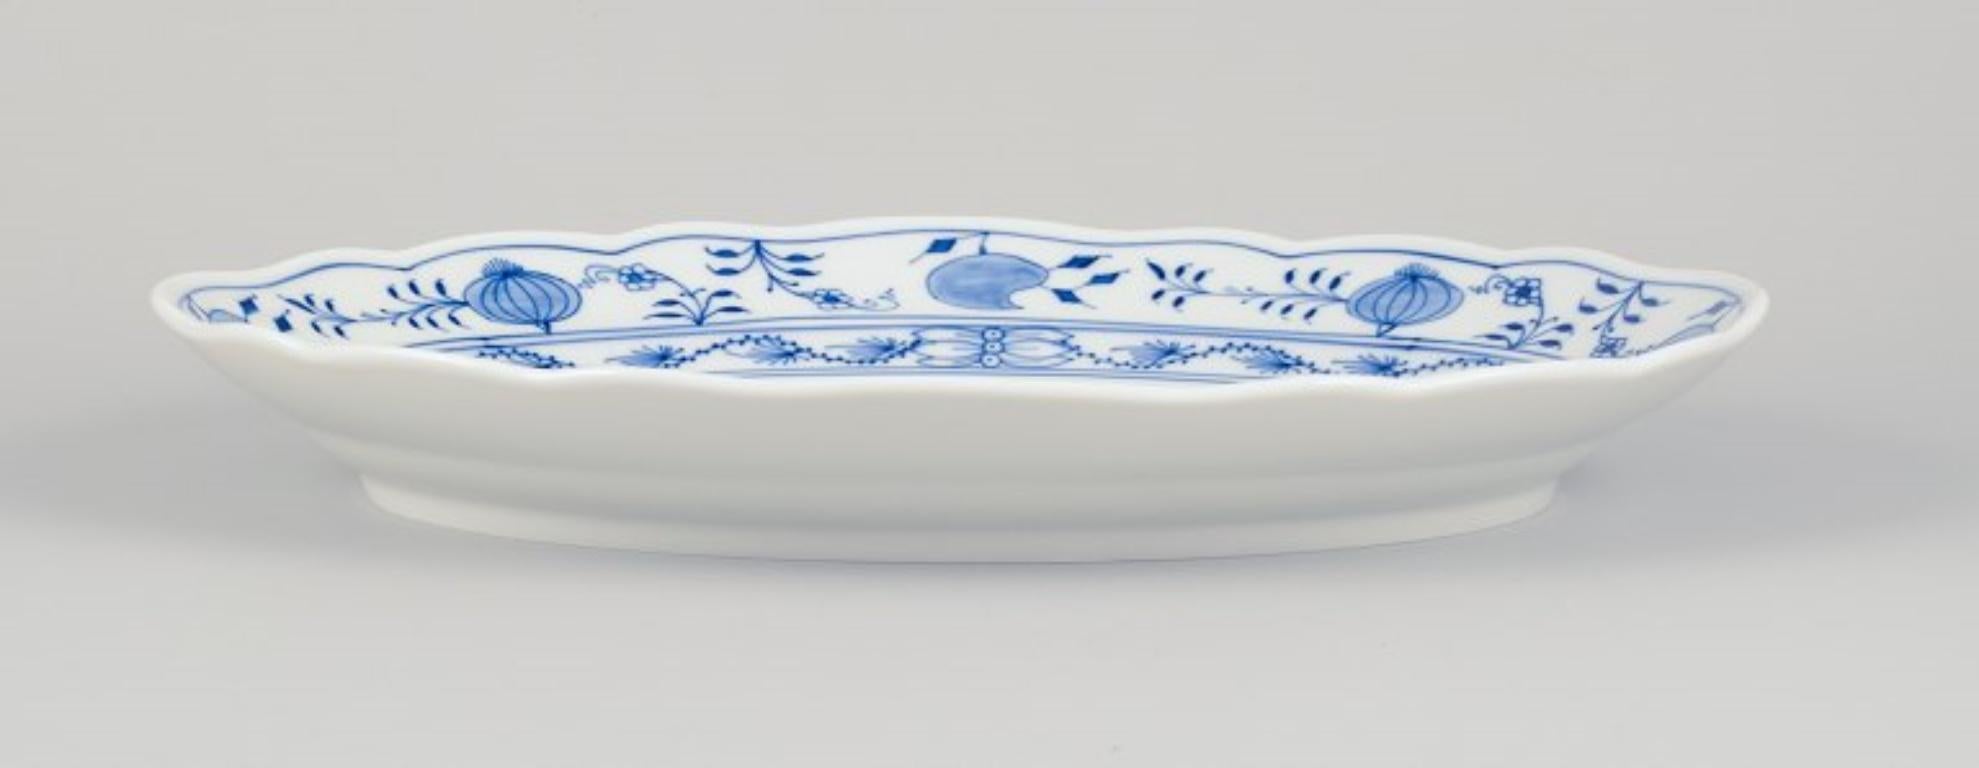 Meissen, Germany. Large oval Blue Onion pattern serving platter. 
Hand-painted.
Mid-20th century.
Marked.
First factory quality.
In perfect condition.
Dimensions: Length 35.2 cm x Width 26.0 cm x Height 4.6 cm.